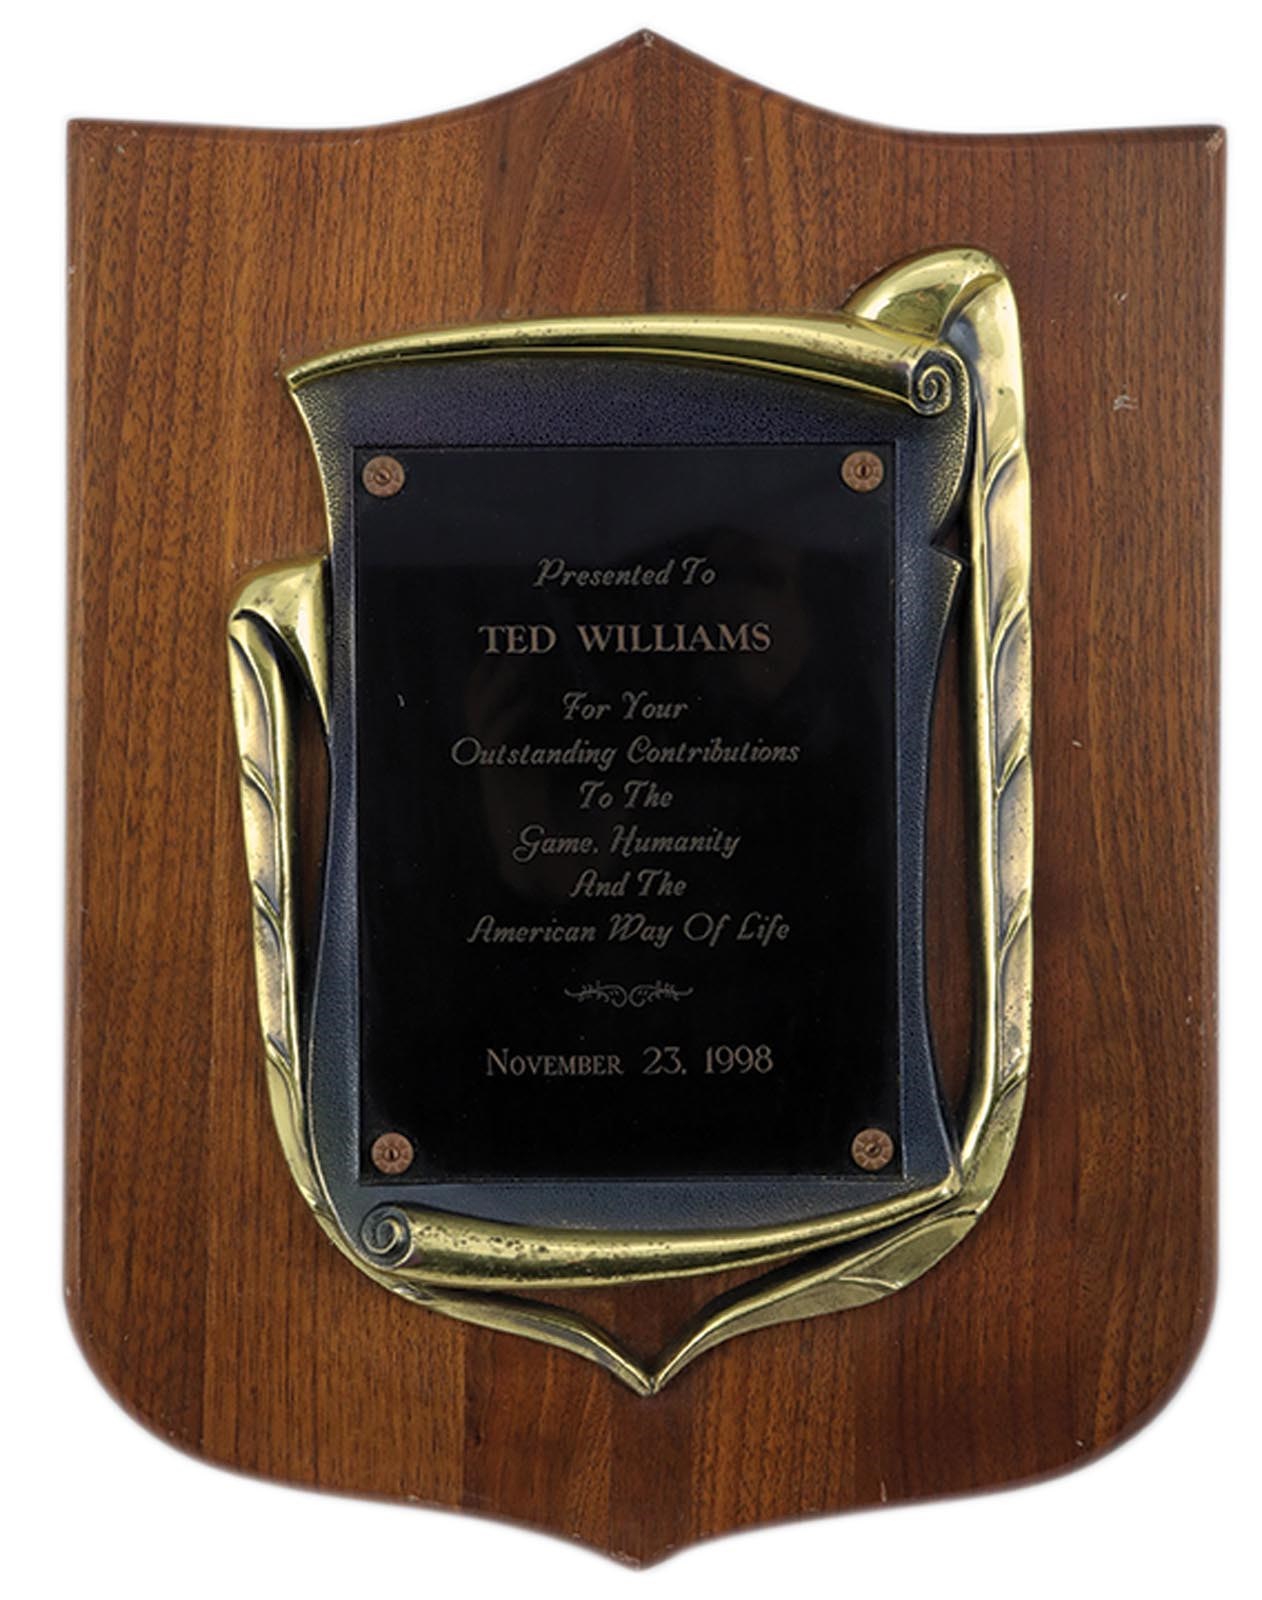 Boston Sports - Award Plaque Presented to Ted Williams